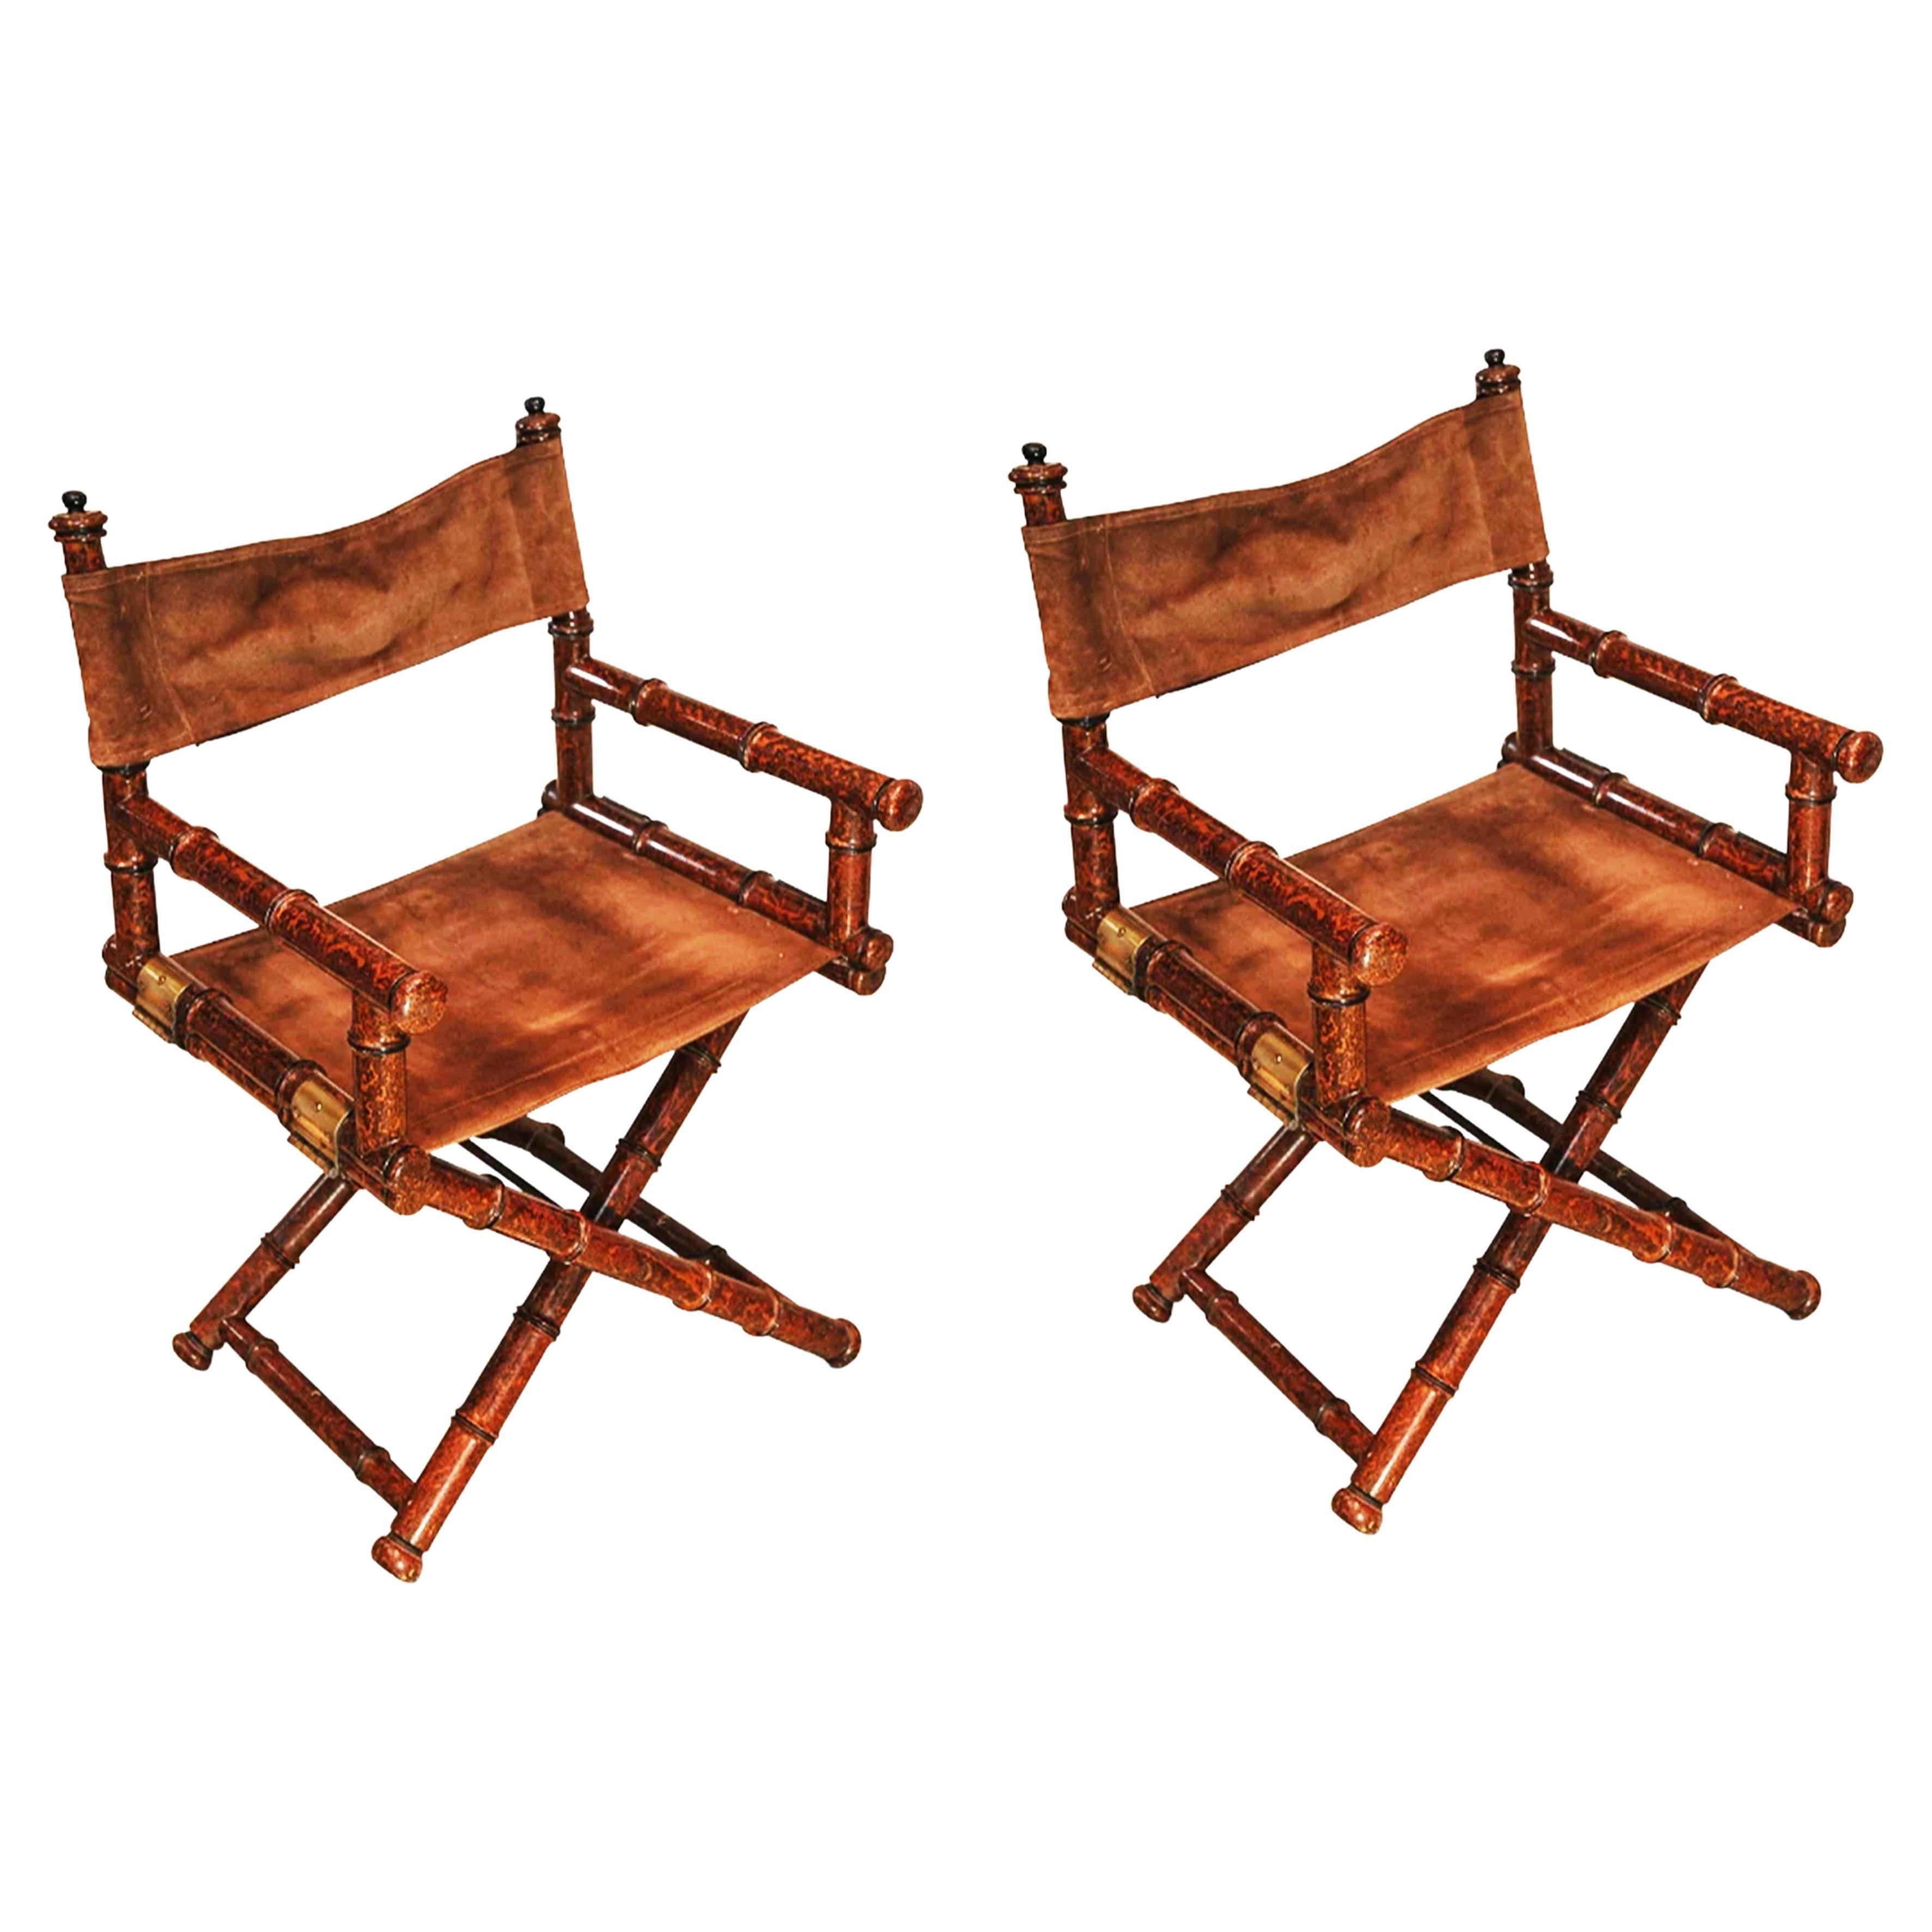  Pair Of Faux Bamboo Brass & Suede Folding Safari Chairs By Galeries Lafayette For Sale